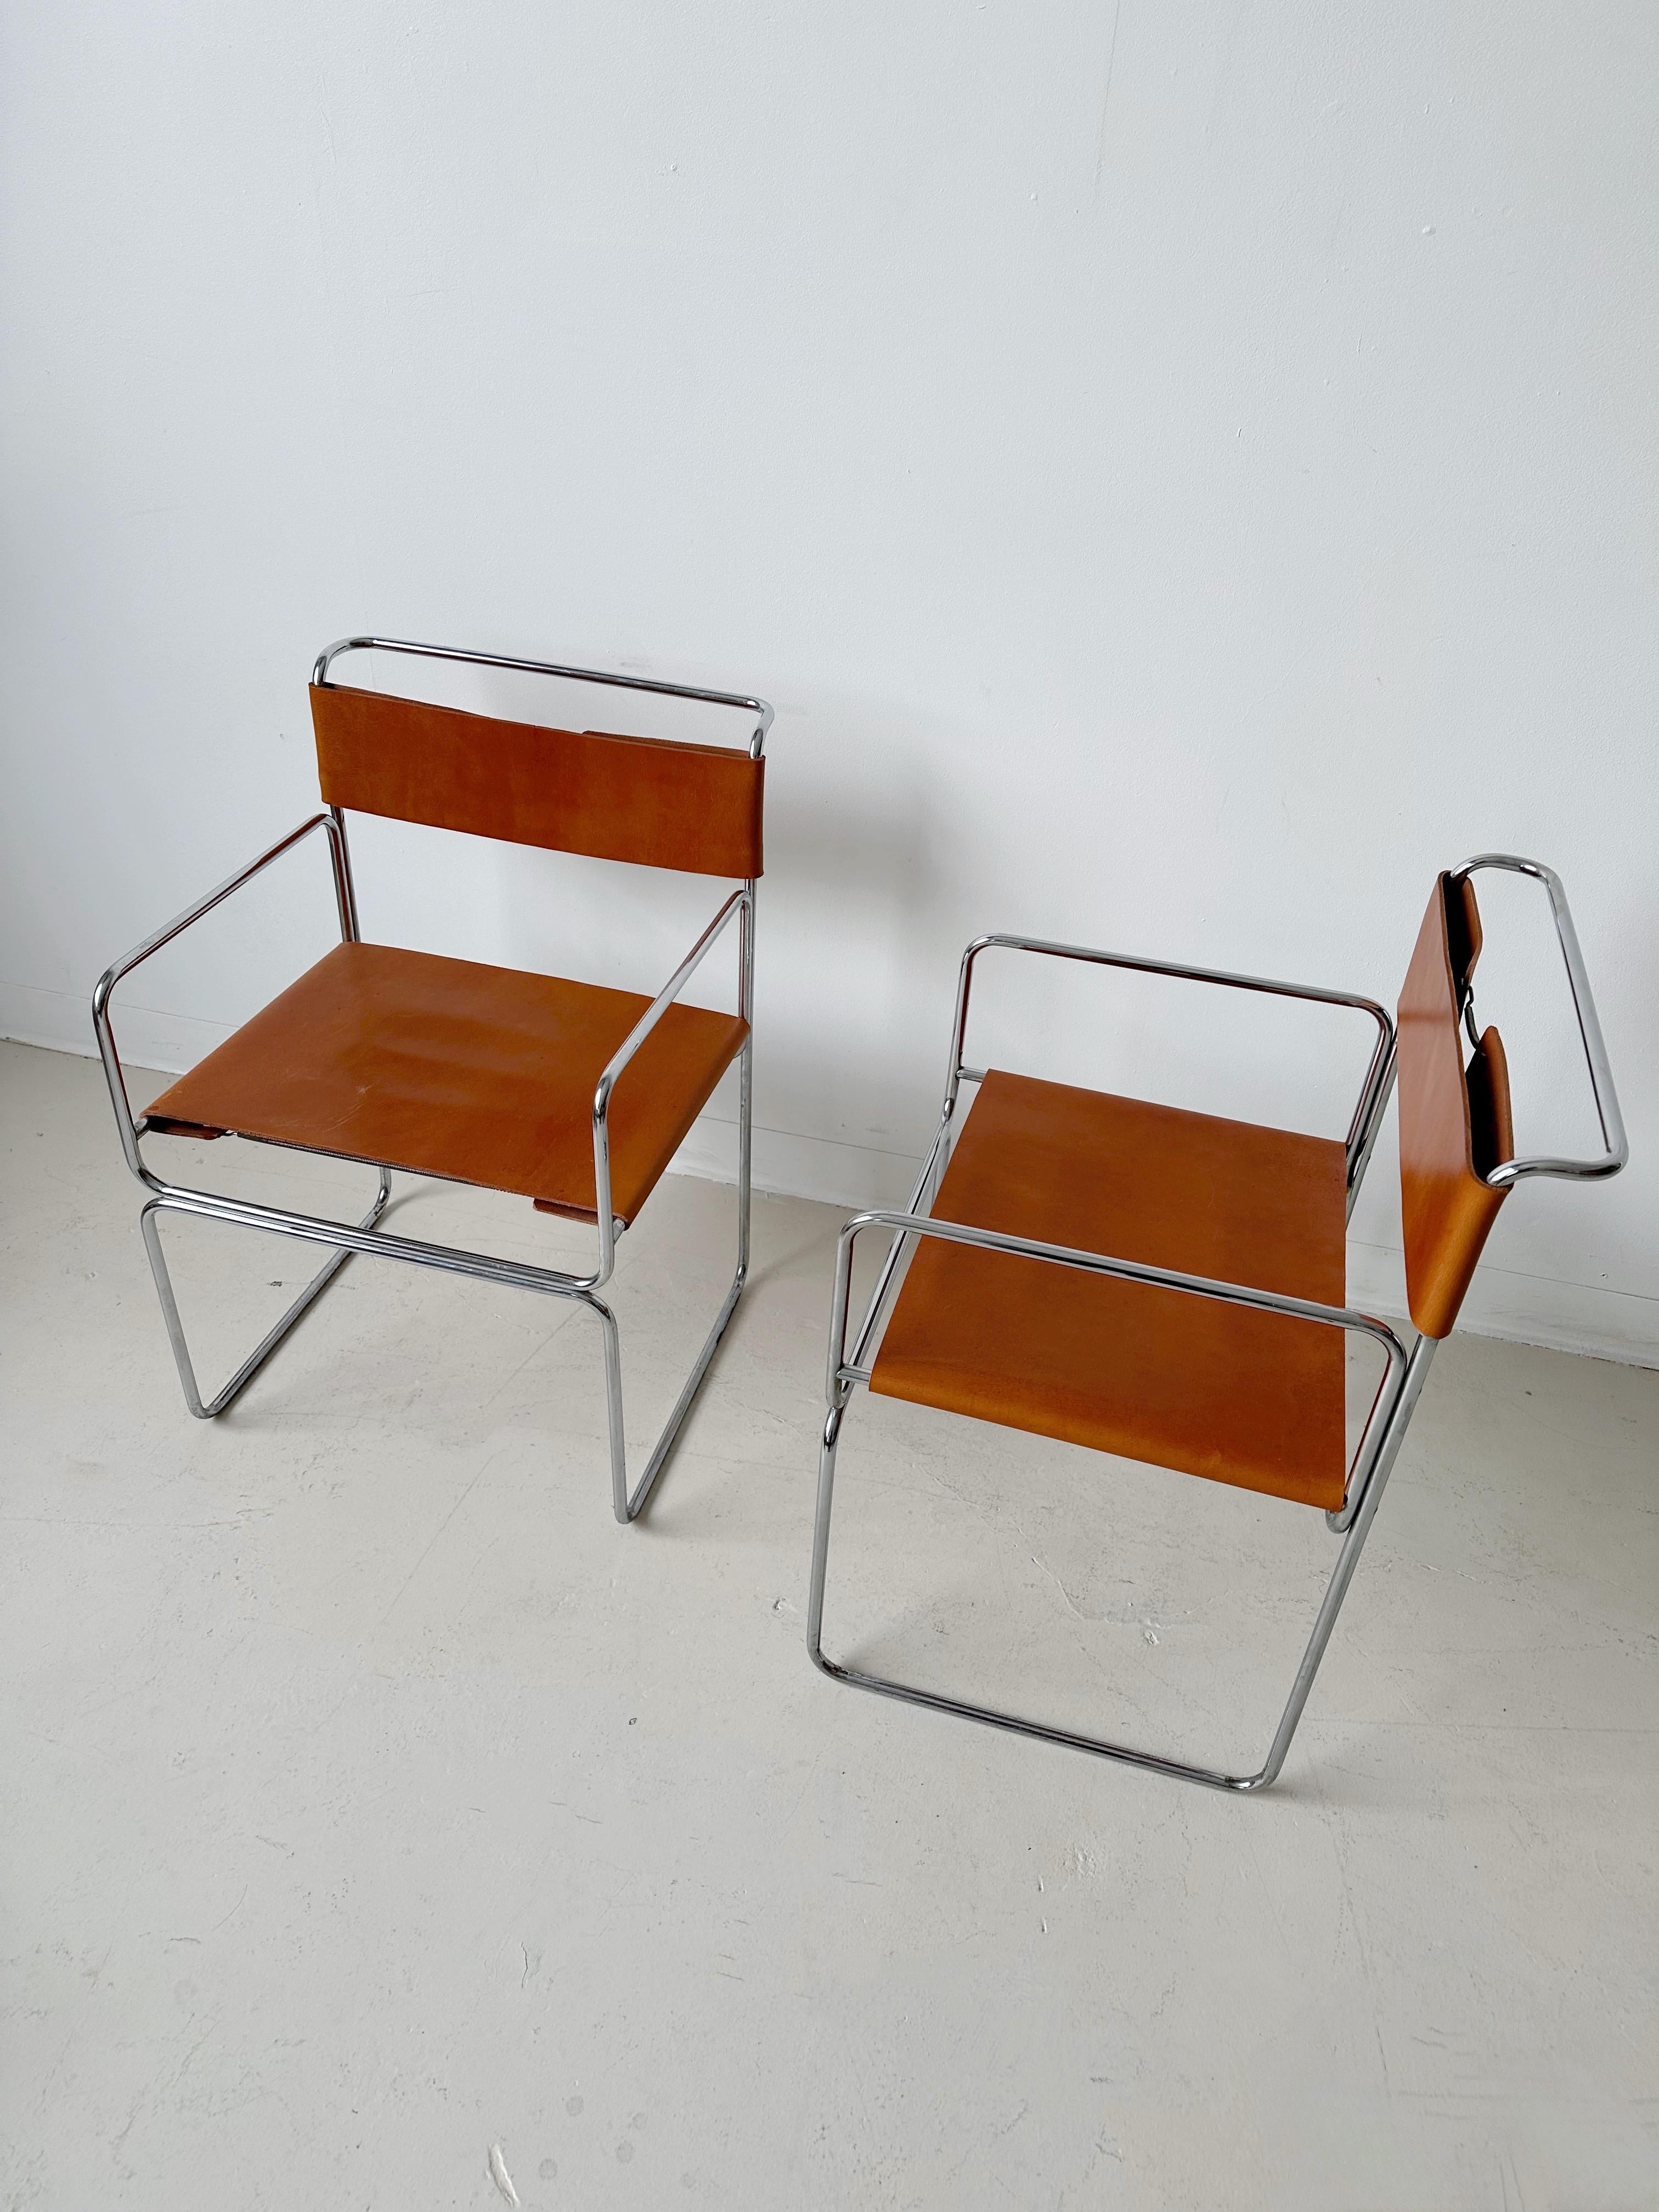 4 Steel & Tan Leather Libellula Chairs by Giovanni Carini for Planula, 70's

Price is for the set

//

Dimensions:
21”W x 22”D x 30”H  each

Seat height 17